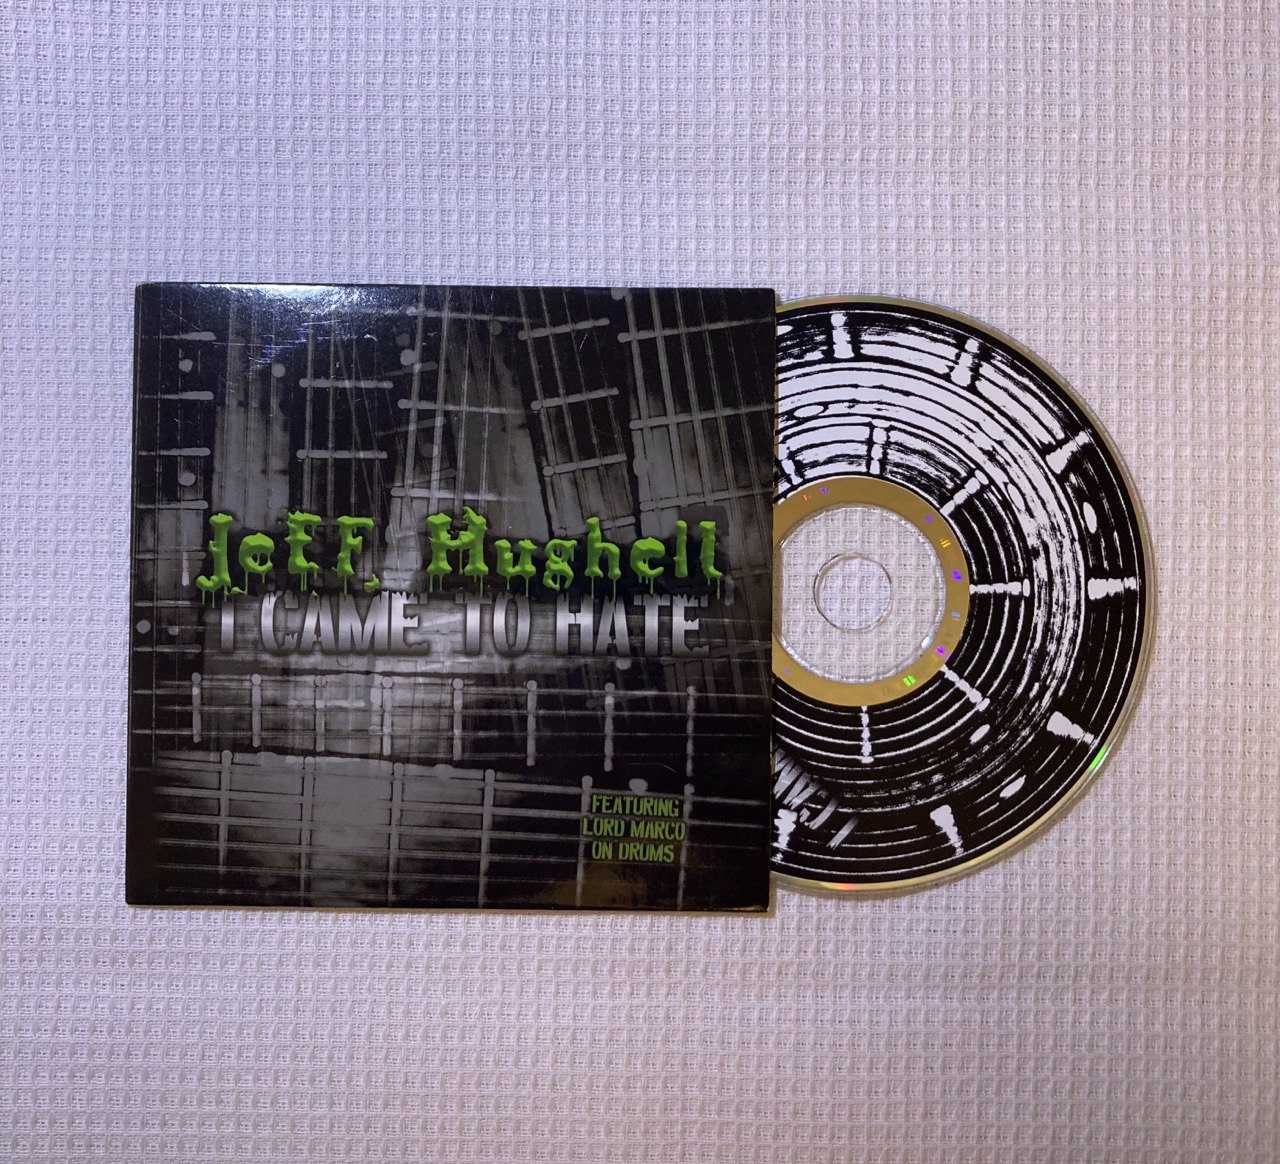 Jeff Hughell - I Came To Hate [2009] Bass, Death Metal, Solo Bass CD